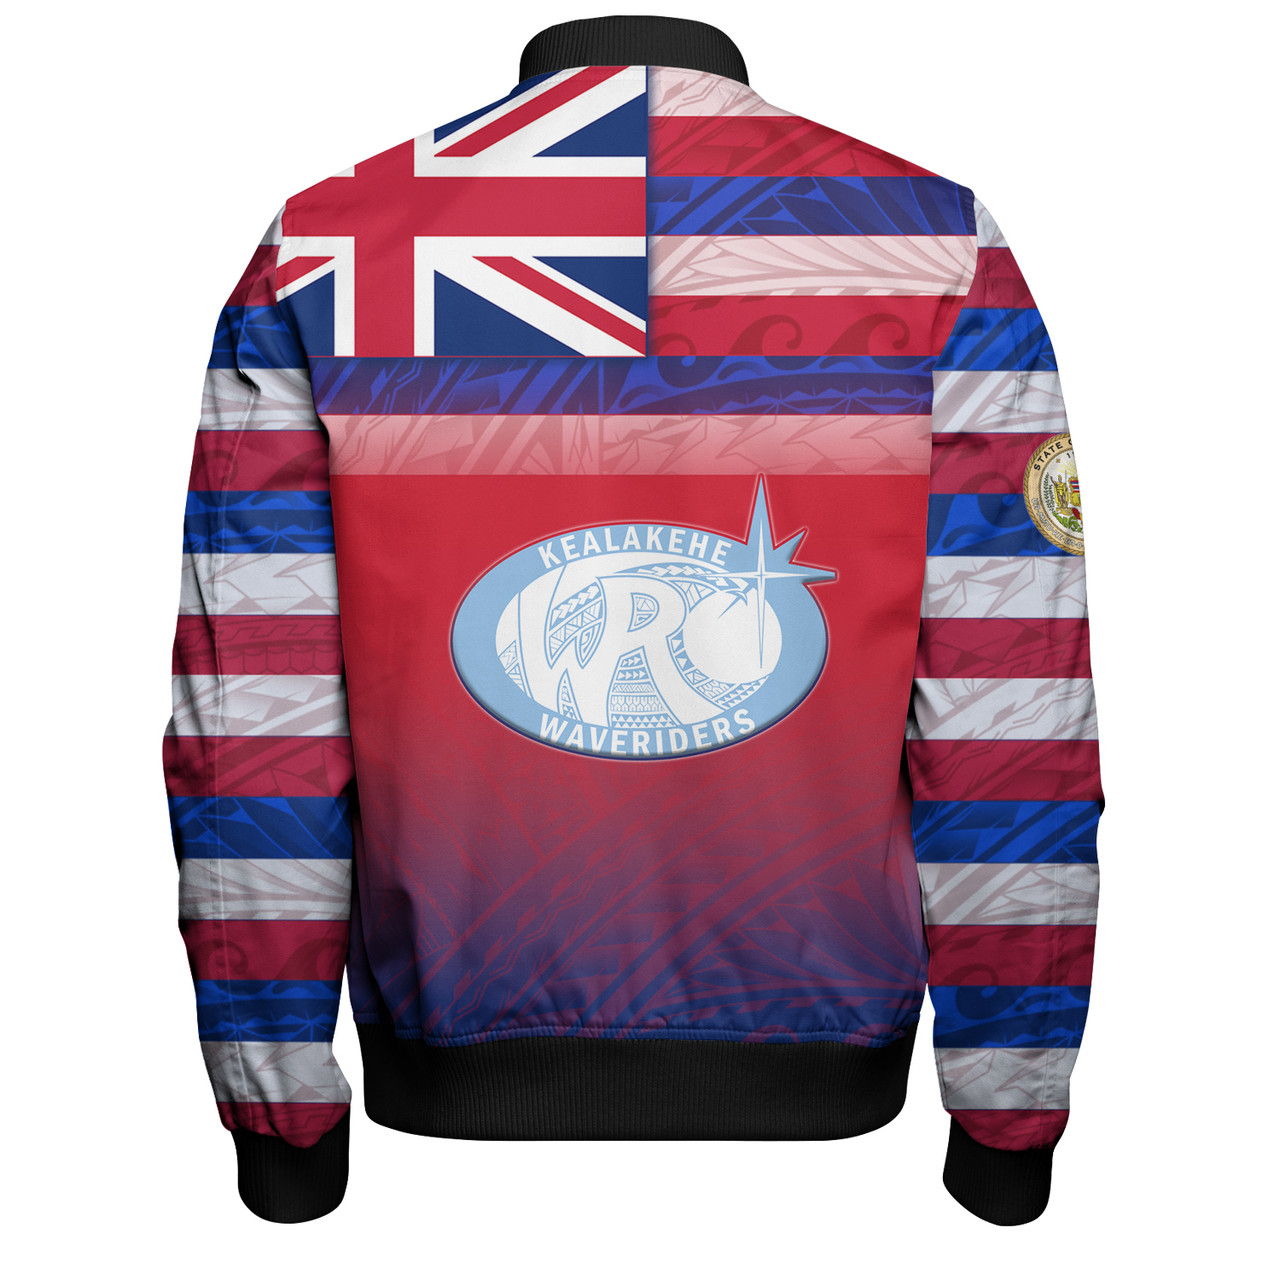 Hawaii Kealakehe High School Bomber Jacket Flag Color With Traditional Patterns